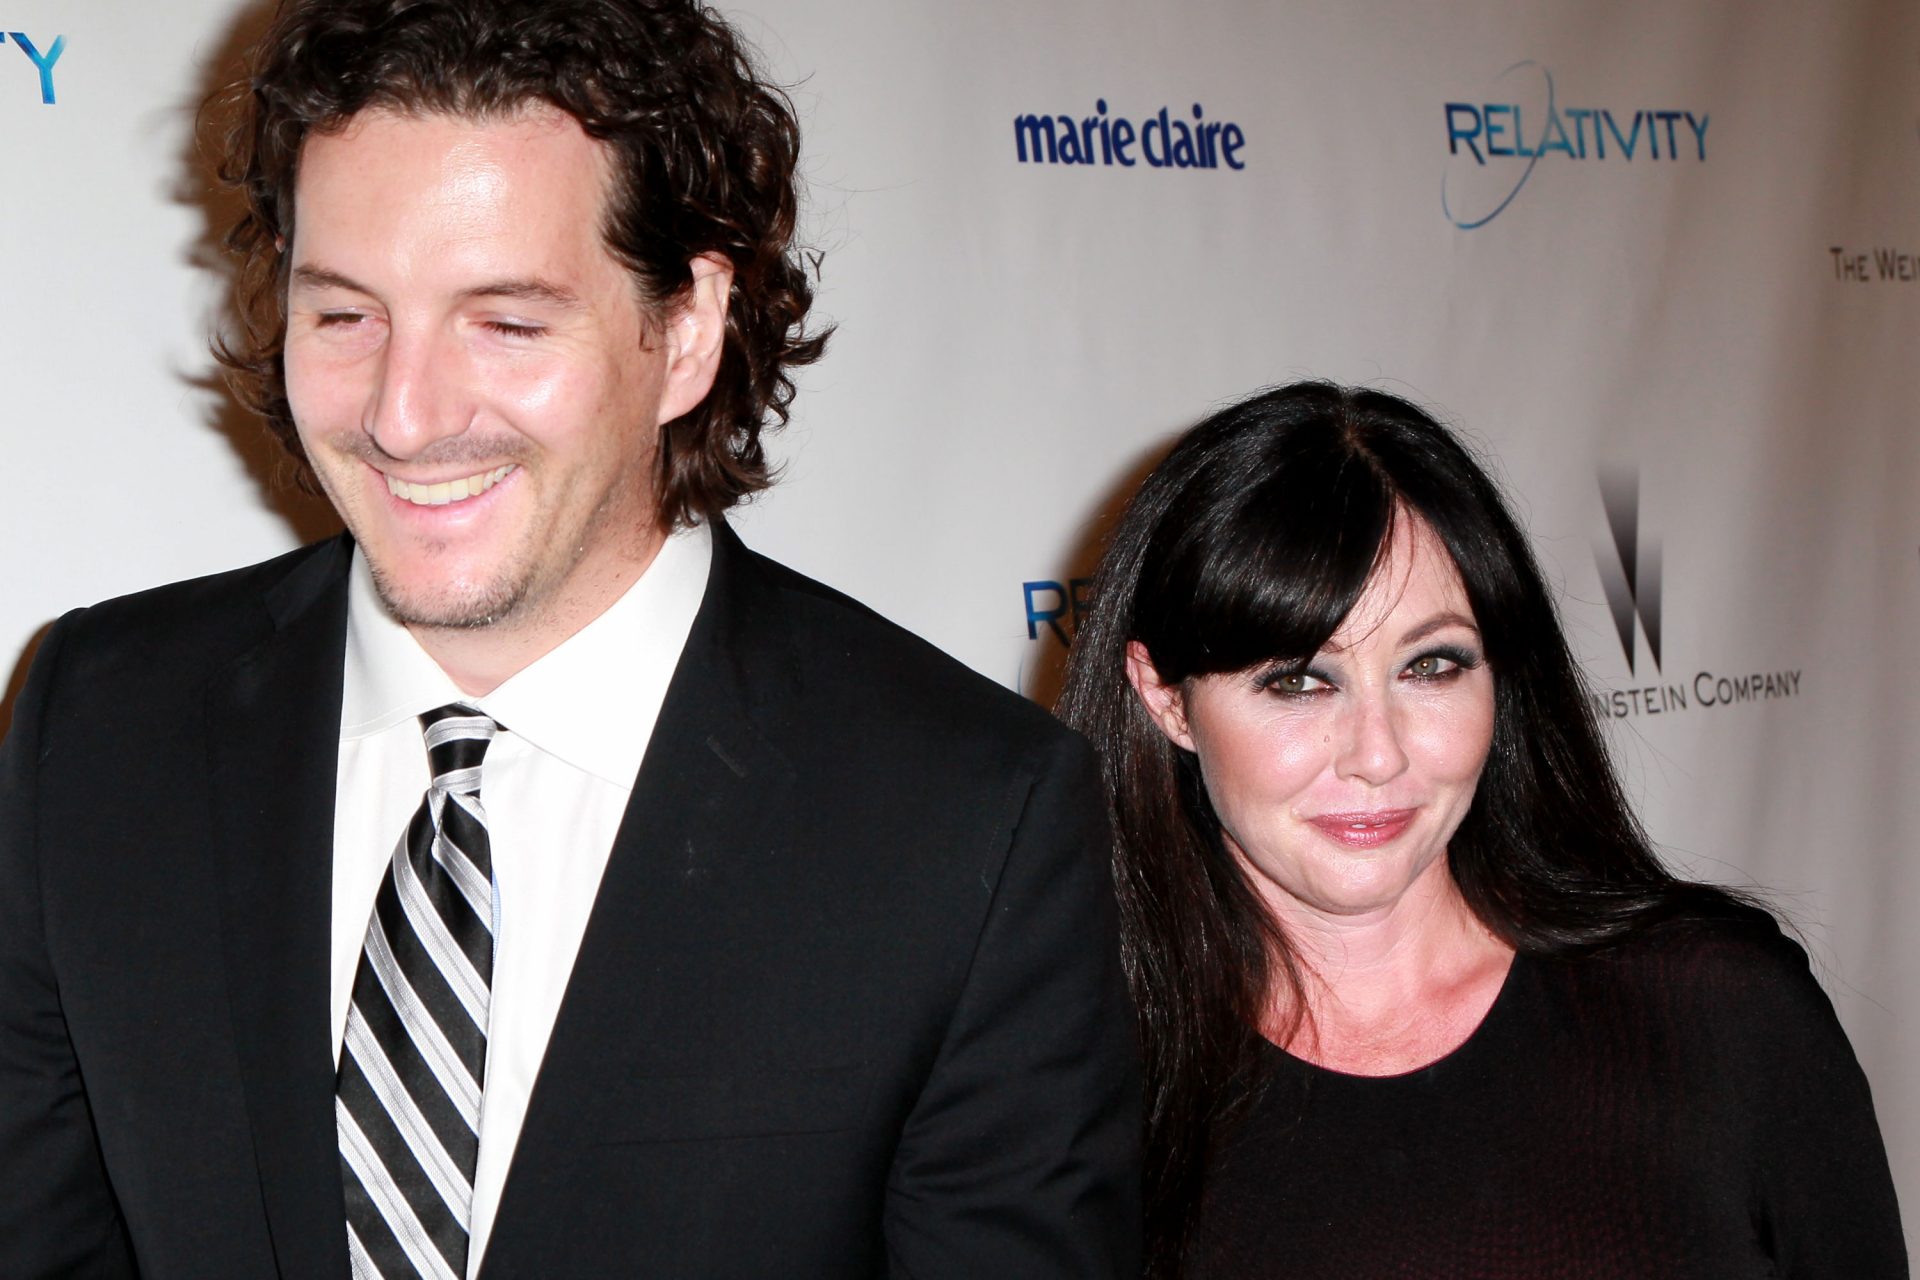 The tough story of Shannen Doherty's divorce